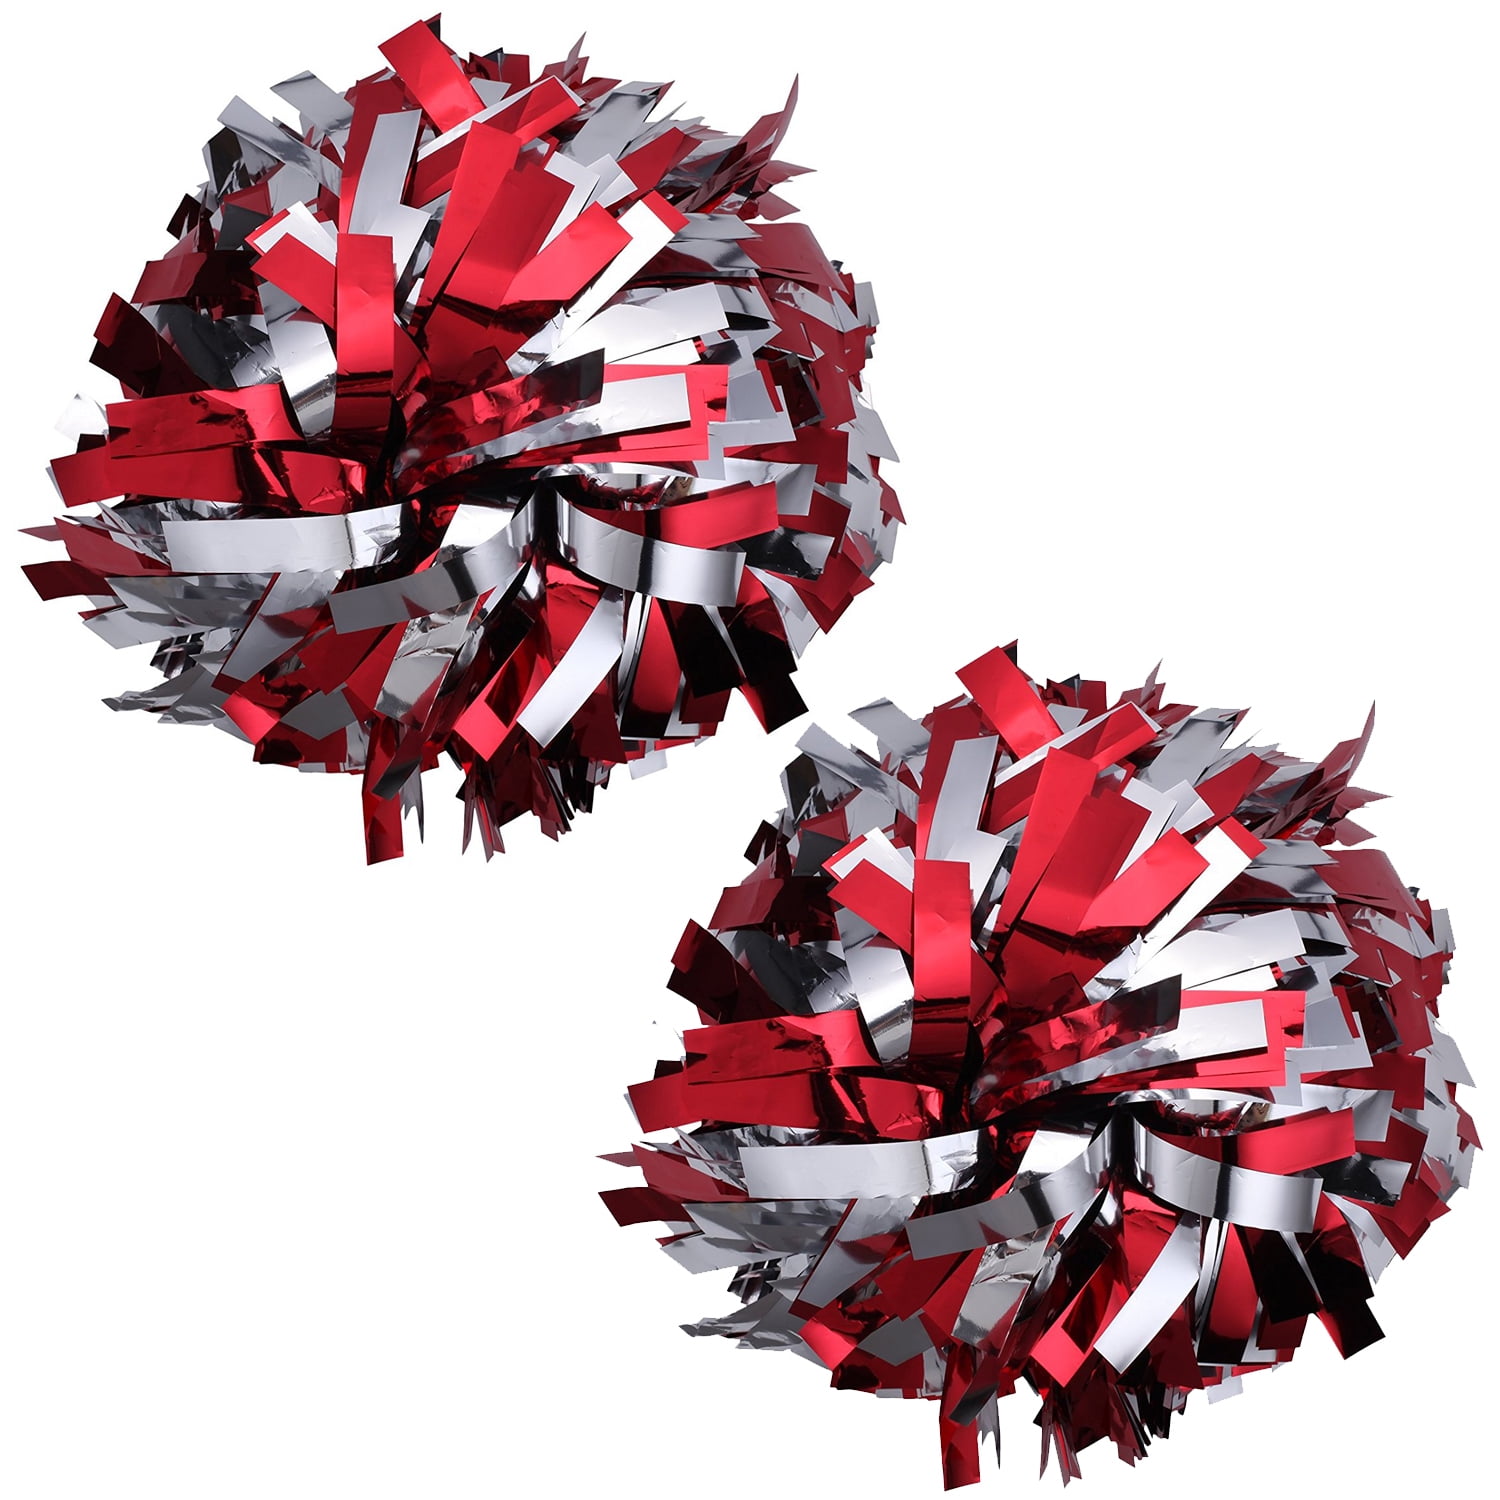 2Pieces/Pair High Quality Metal Red Mix White Cheerleading Pom Poms  Cheerleader Pompon With Rings Handle Match Dance Party Suppl